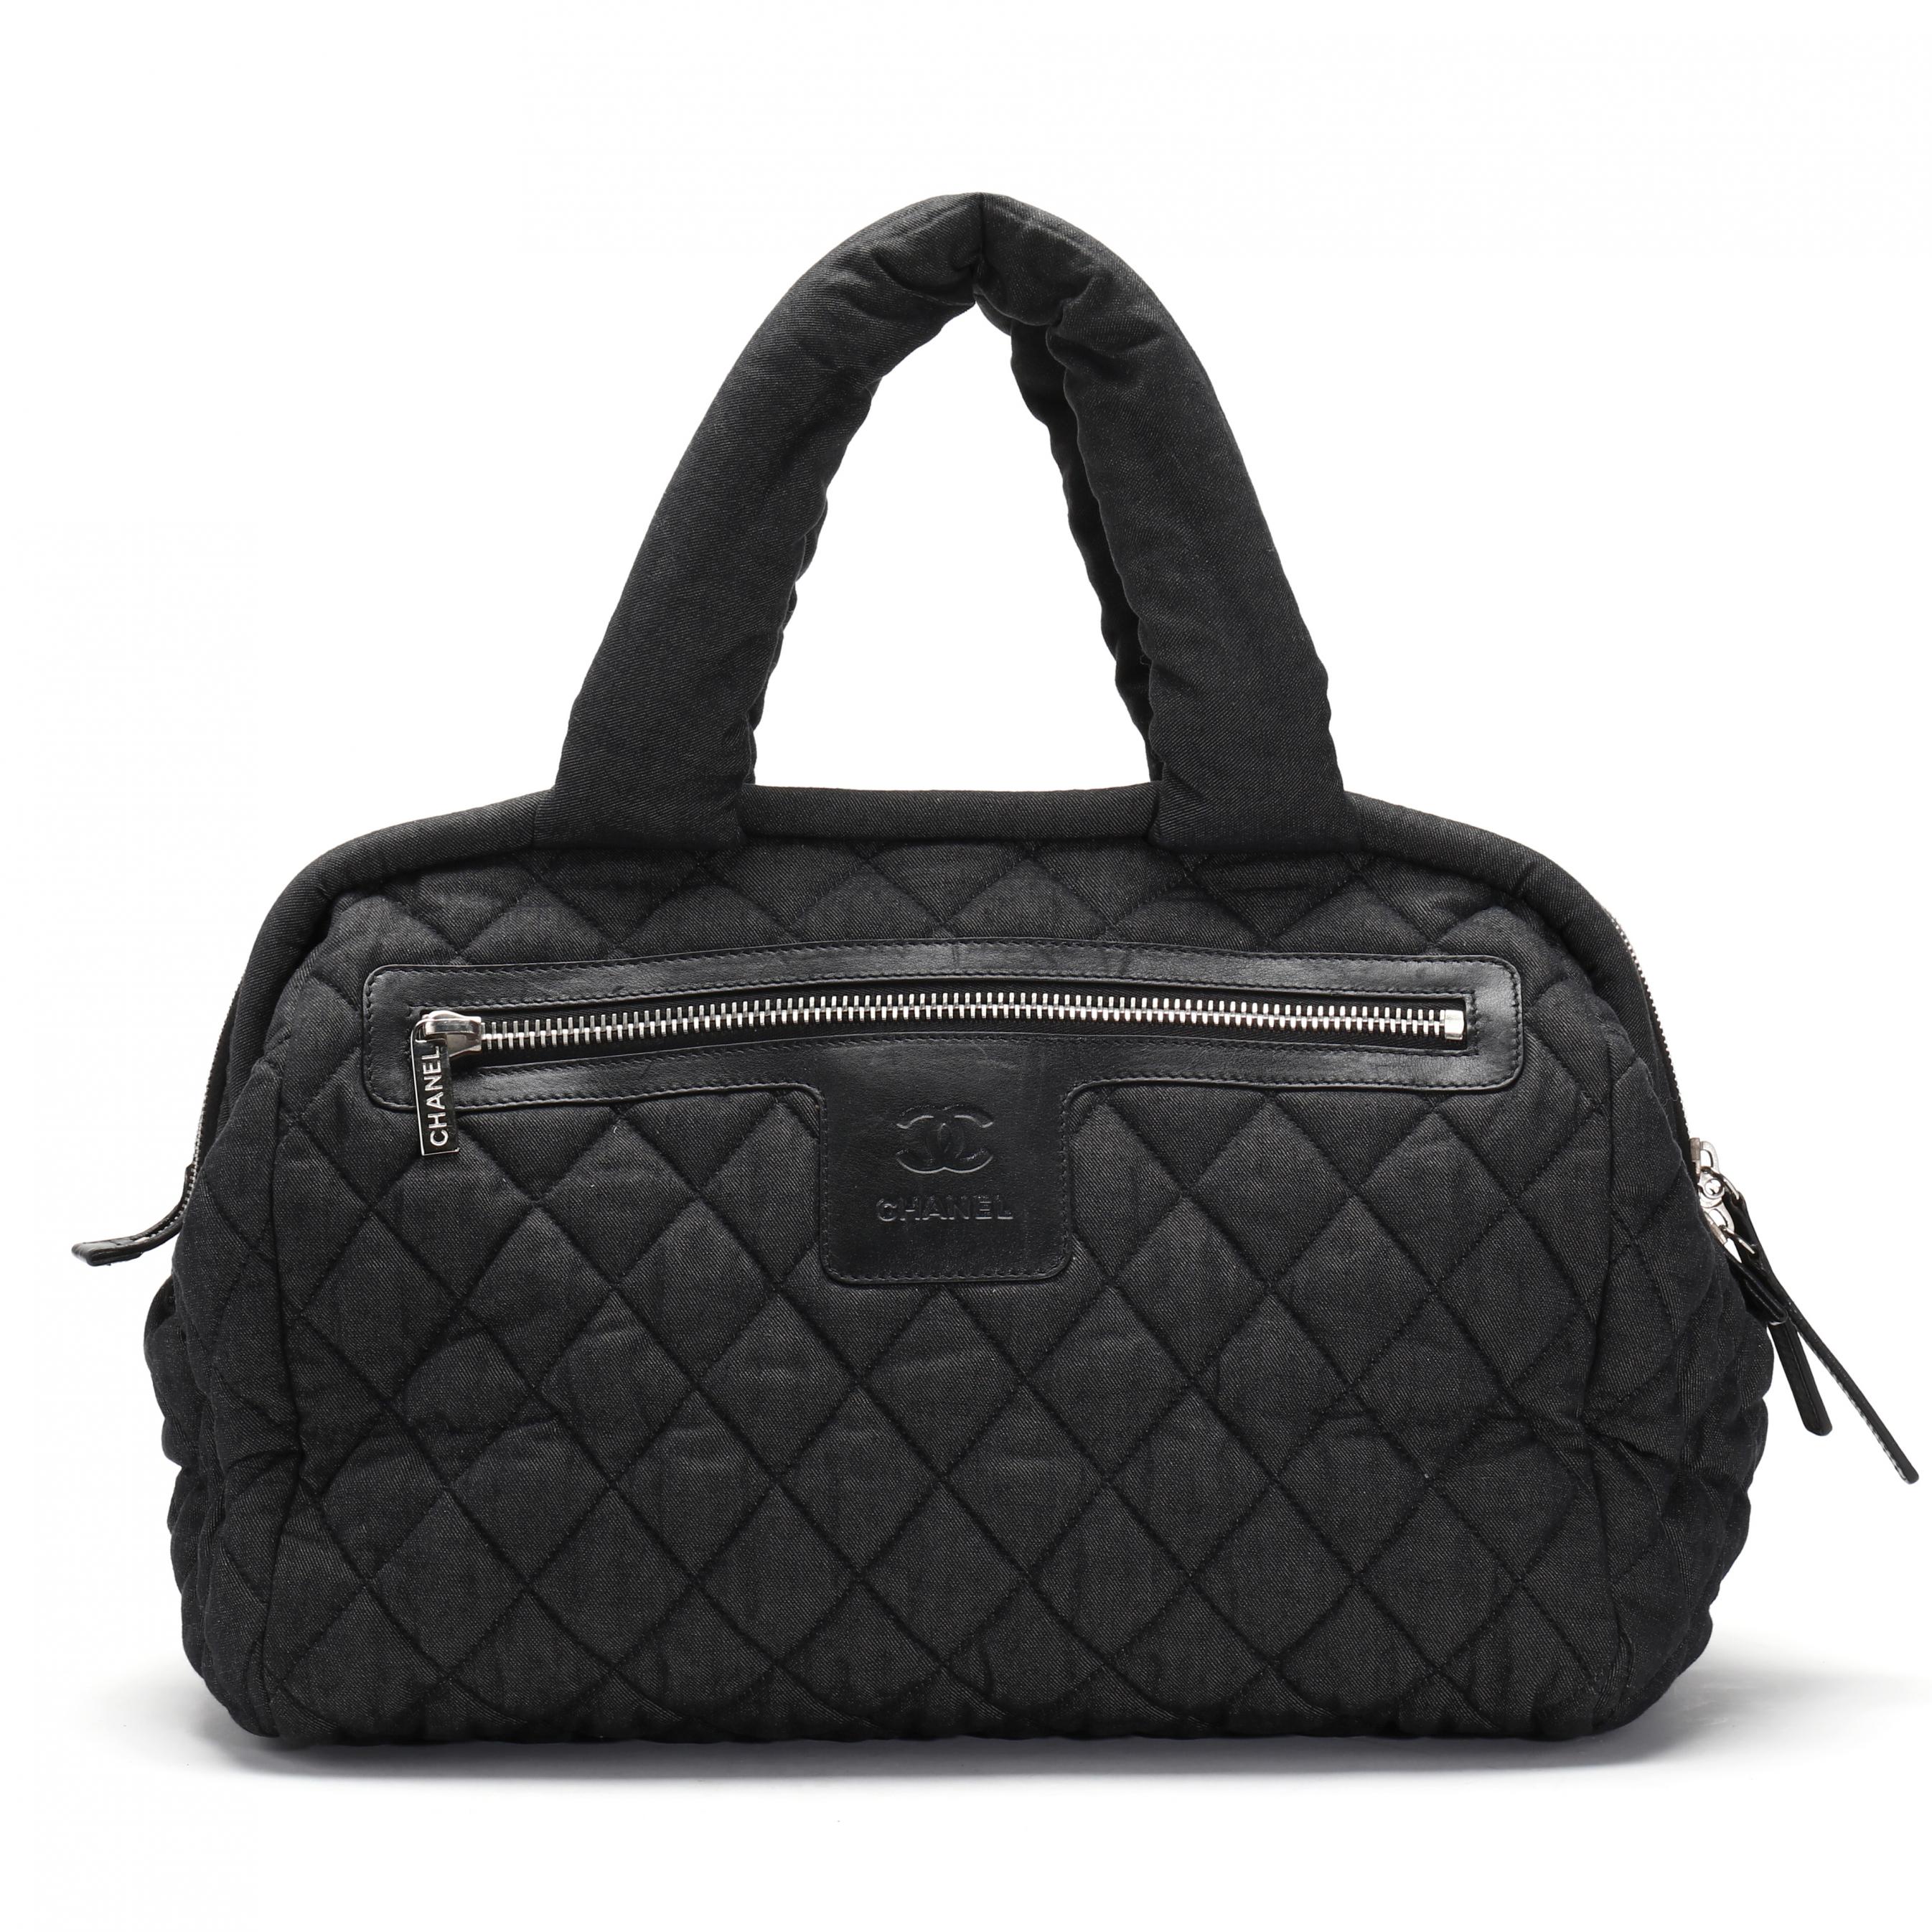 Coco Cocoon Sport Travel Bag, Chanel (Lot 1017 - Estate Jewelry